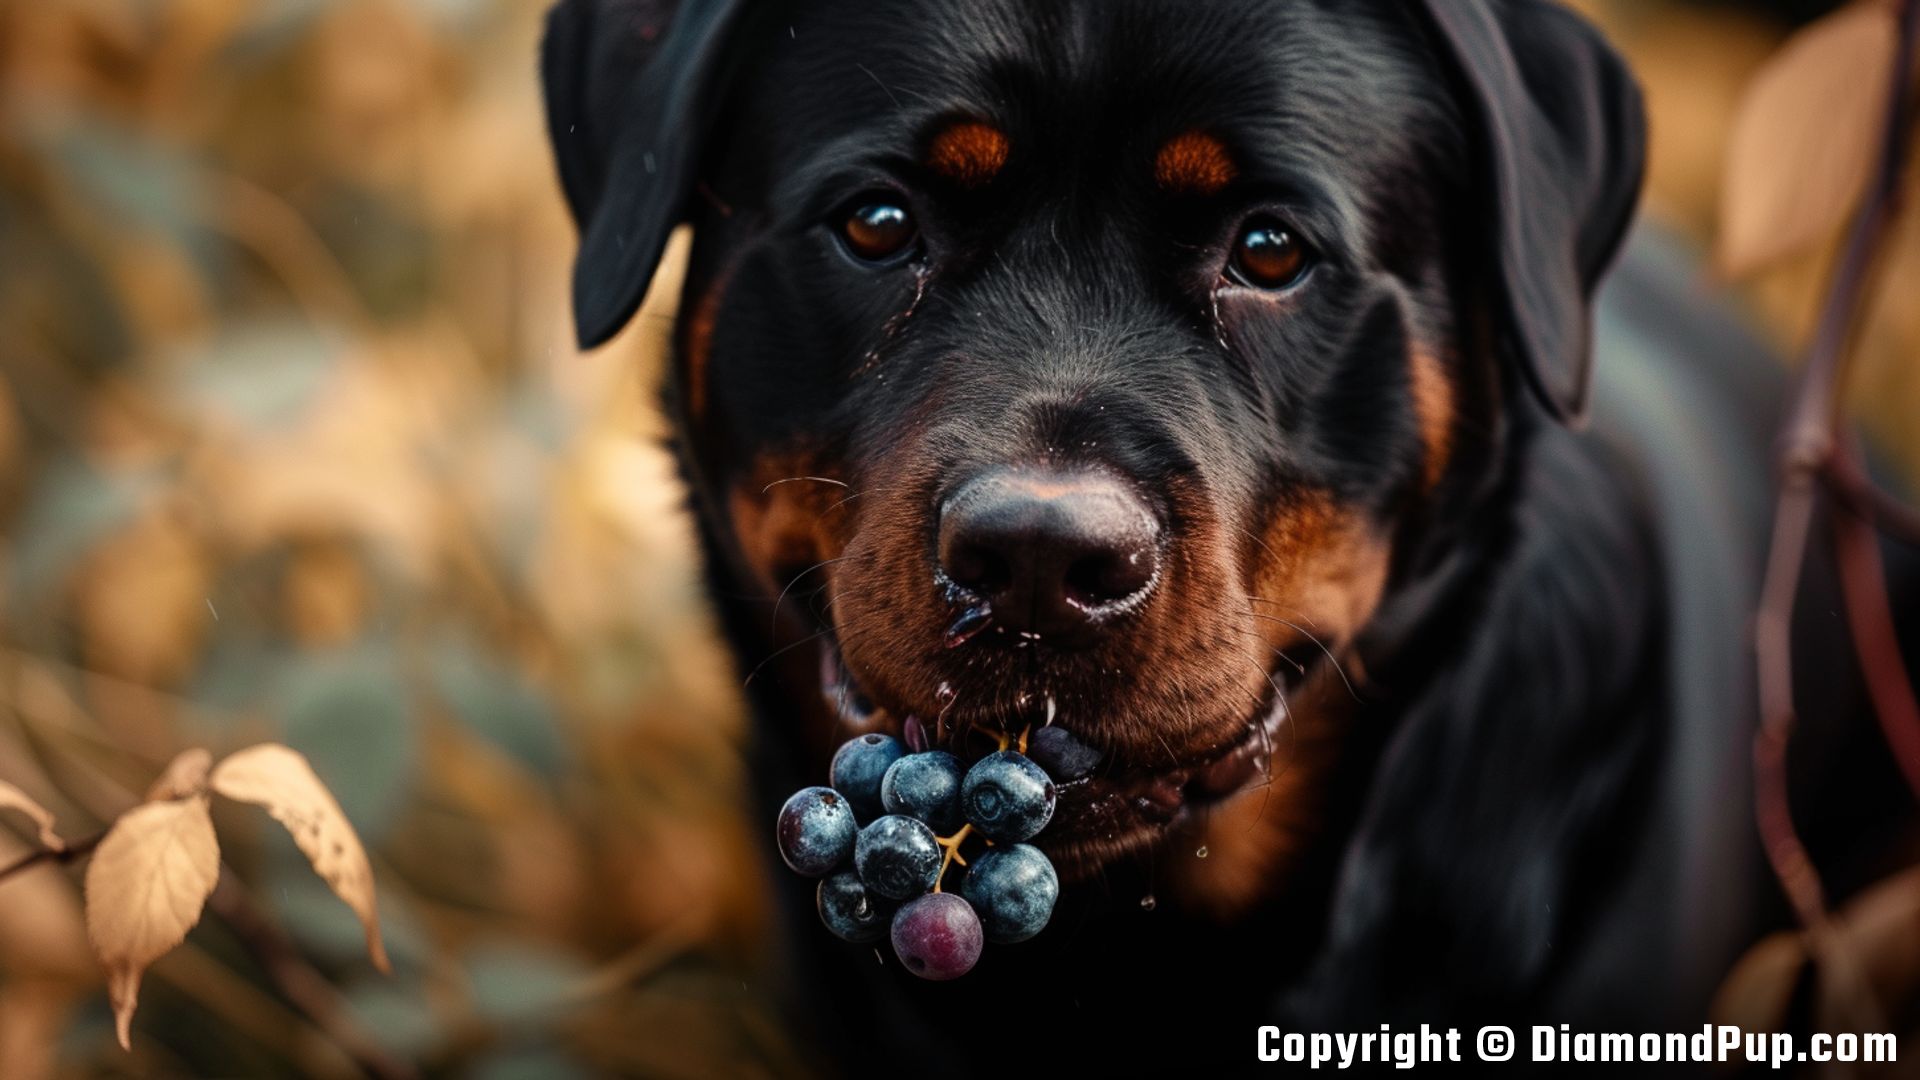 Image of a Happy Rottweiler Eating Blueberries